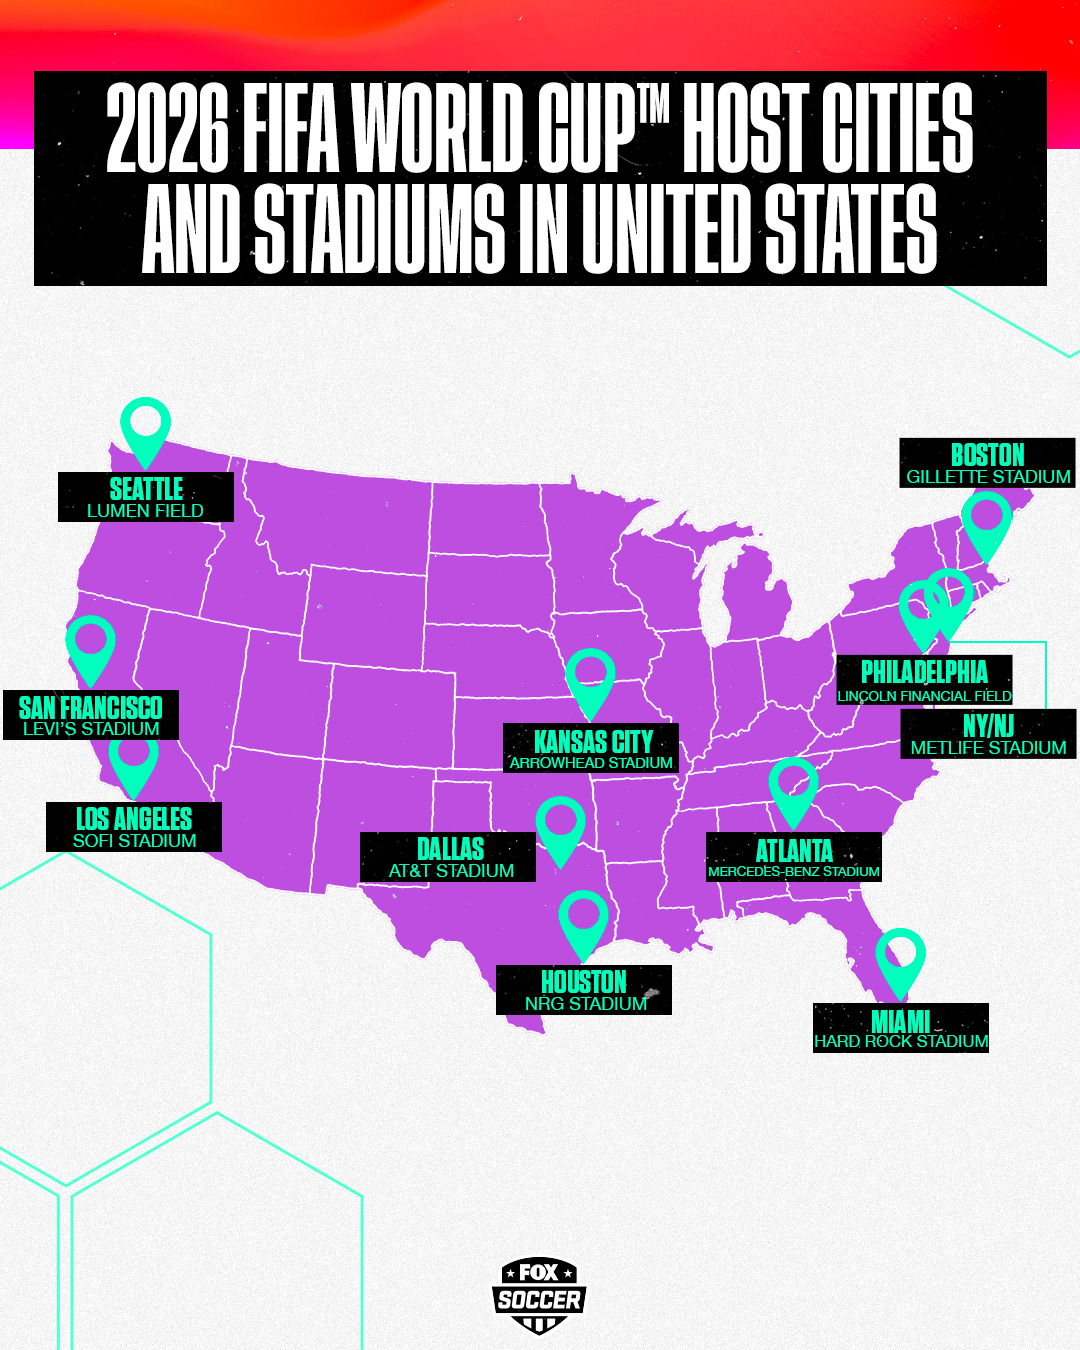 FOX Soccer on X: The 2026 FIFA World Cup Host Cities have been revealed  🙌🌎 Which city are you hoping to catch a game at?   / X